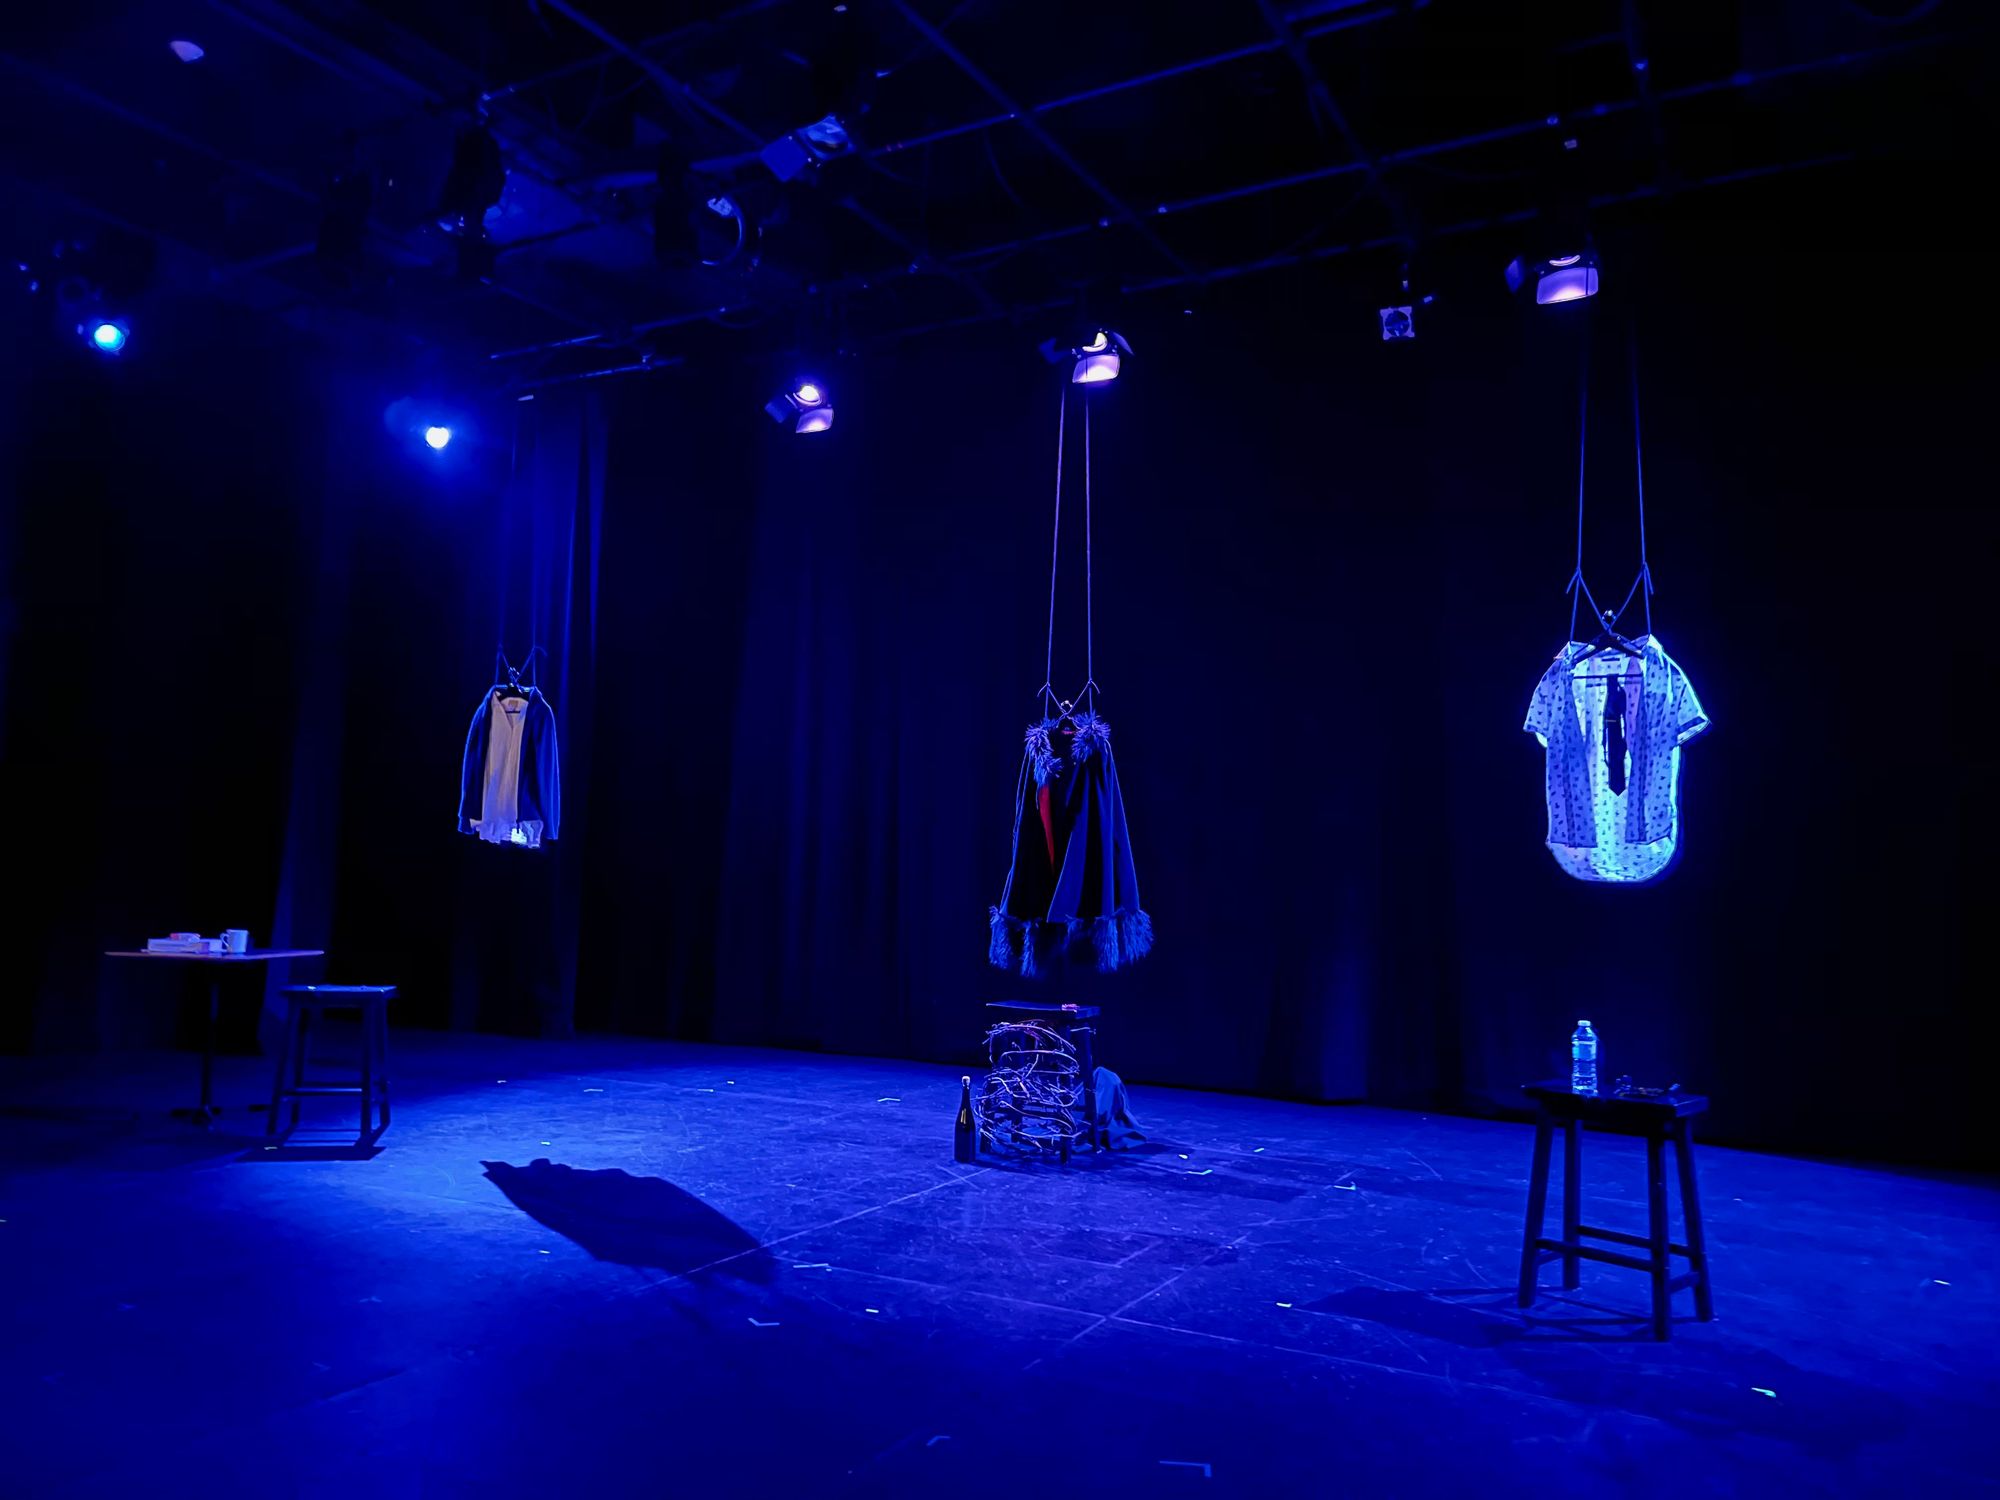 The empty stage for DRESSED AS PEOPLE: AN UNCANNY TRIPTYCH. The stage is lit in cool blues and set with three minimalist stations for each monologue, each marked out by an outfit hung from the ceiling. To the far left is a modest shirt and cardigan next to a stool; in the middle is a fur-lined cloak atop a stool wrapped in brambles next to a bottle of wine; to the right is a snazzy short-sleeved button-up shirt with tie, over a stool set with glasses and a water bottle.